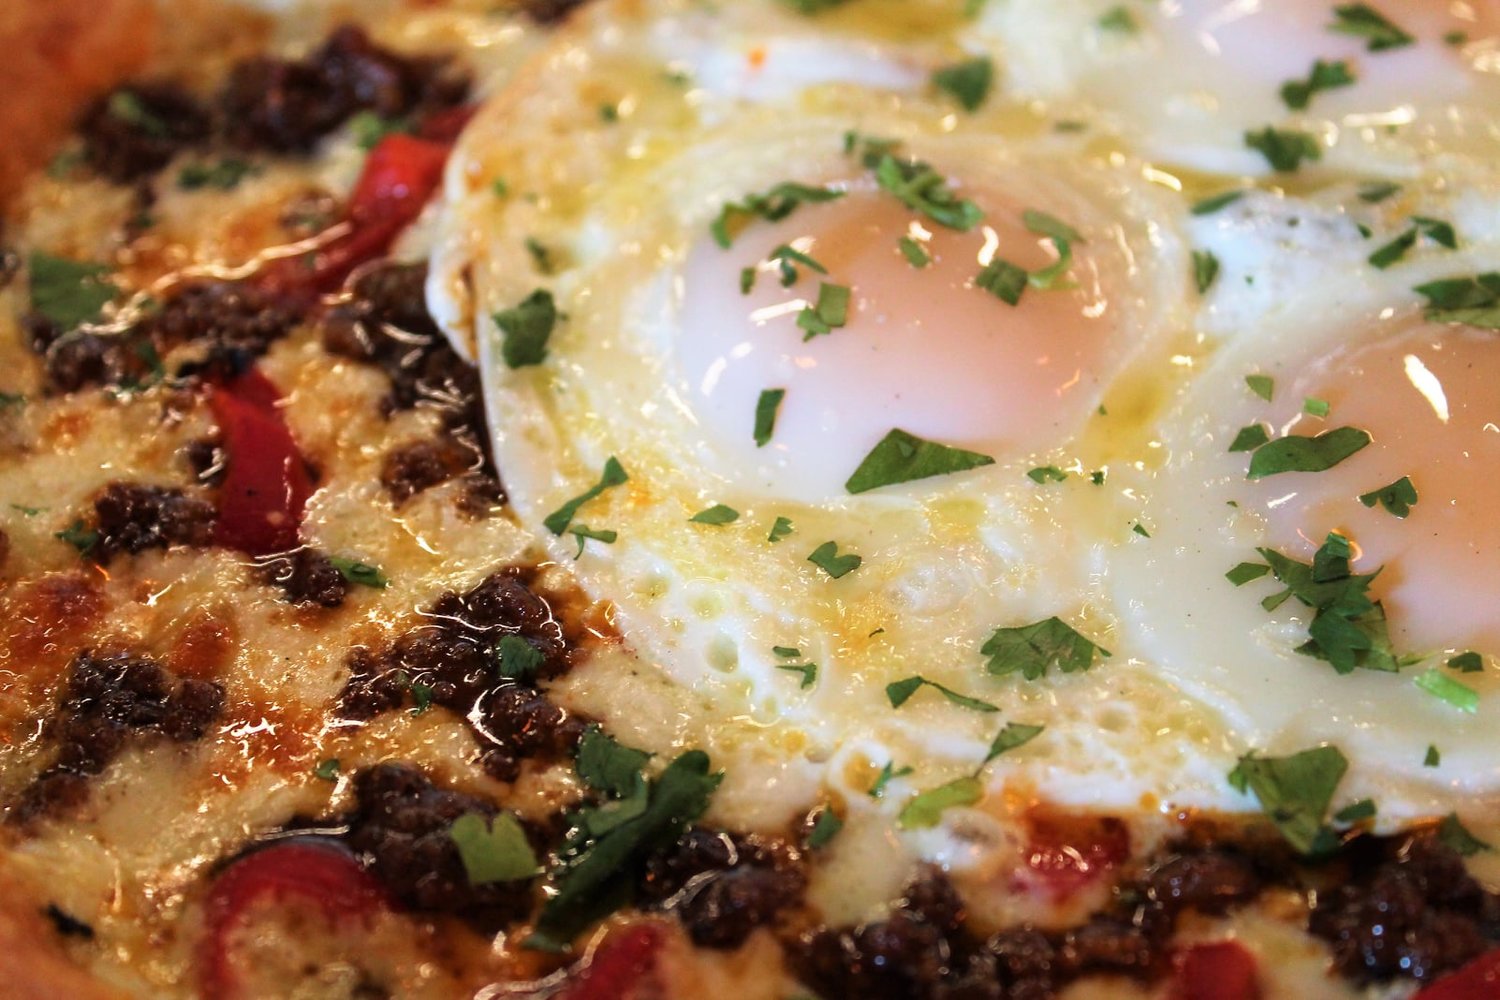 This $15 pie has three eggs, spicy chunks of chorizo, and more.